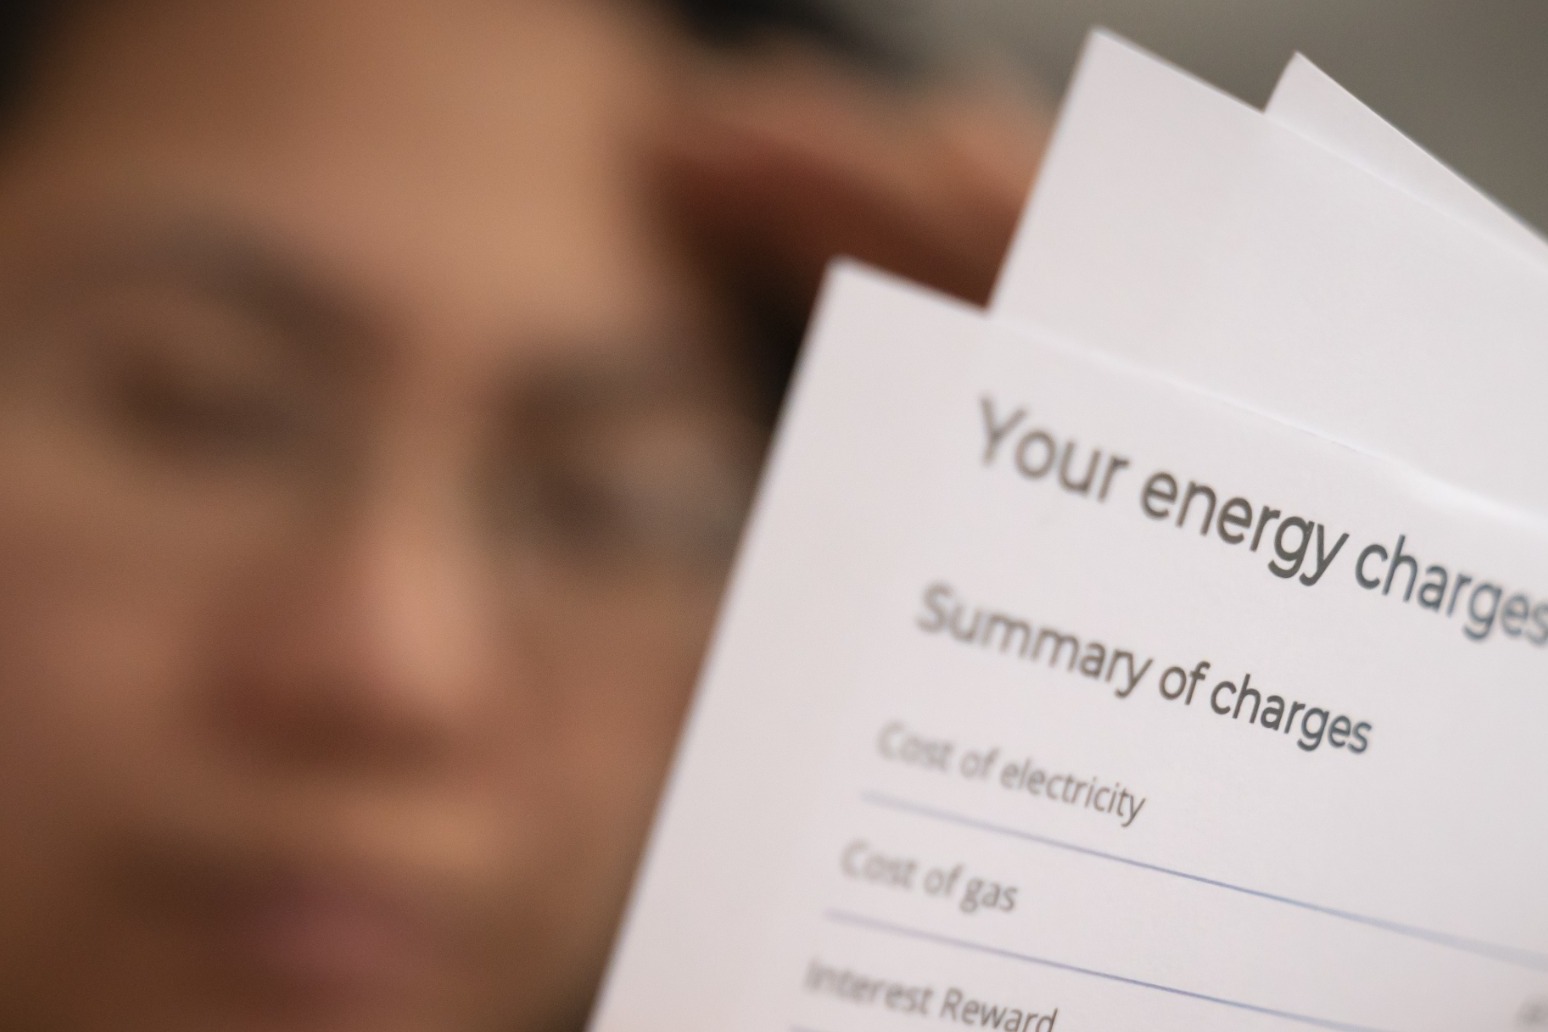 Most energy suppliers must improve help for struggling customers warns Ofgem